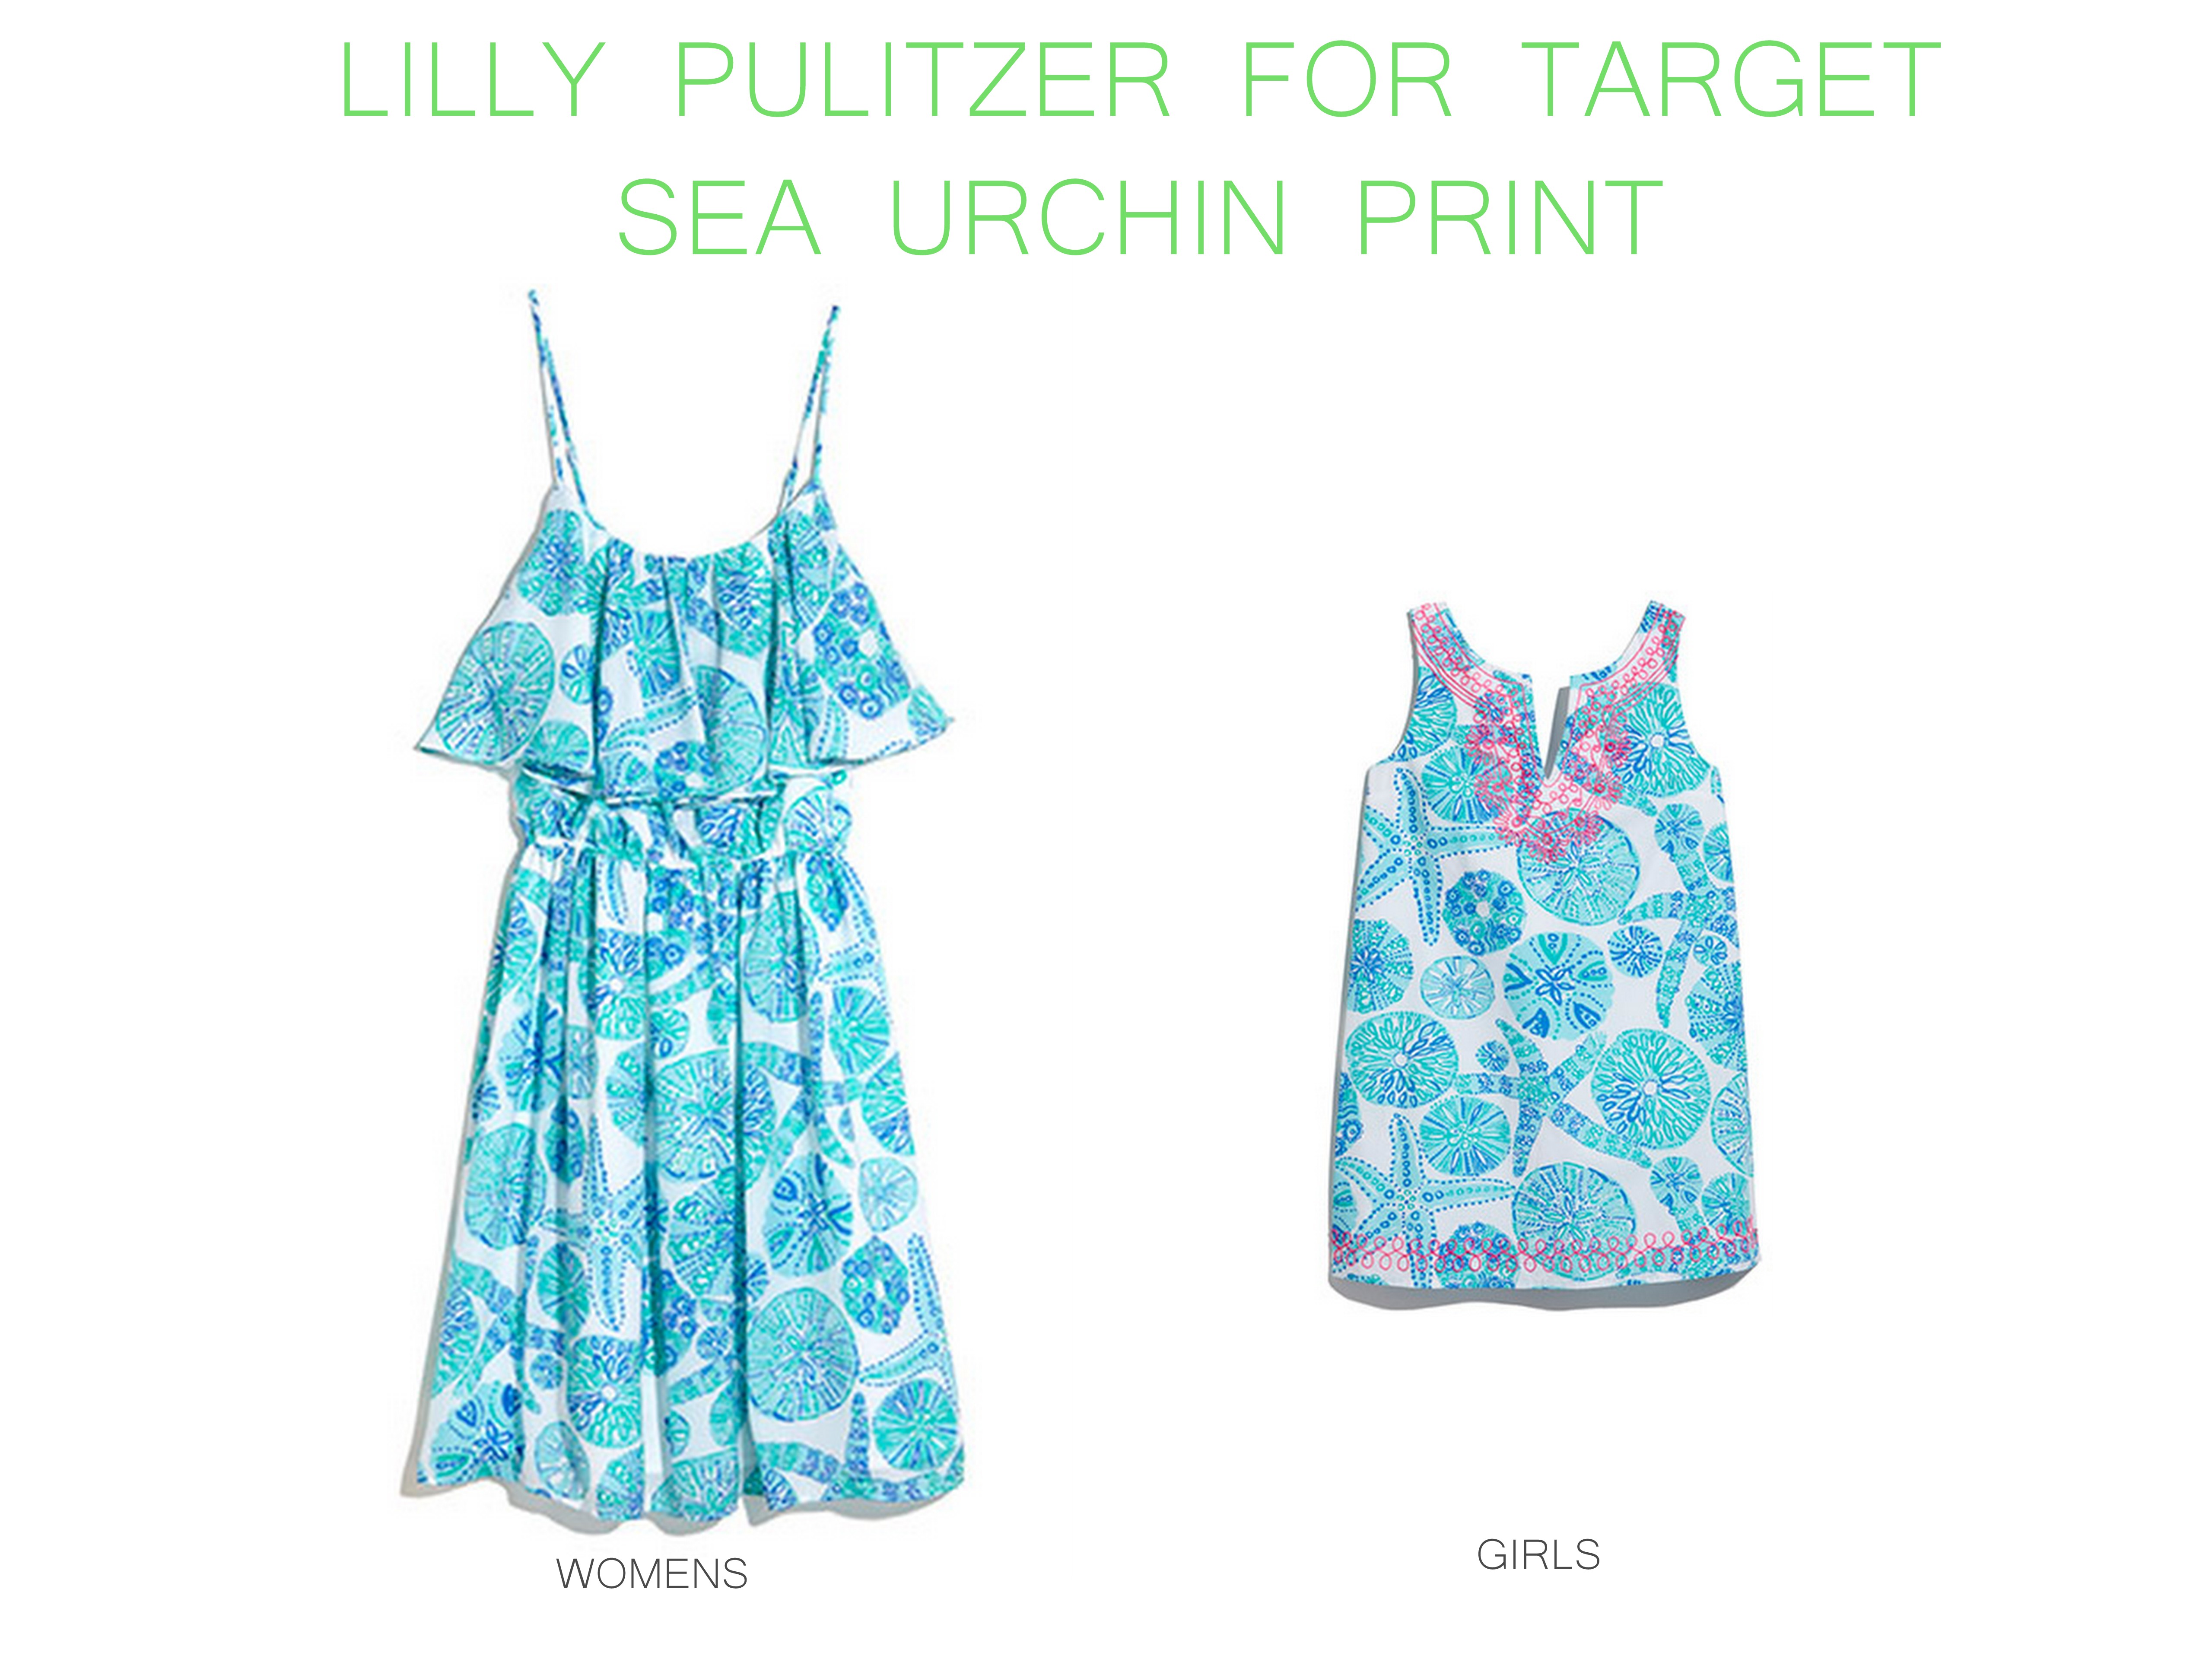 lilly pulitzer for target sea urchin dress